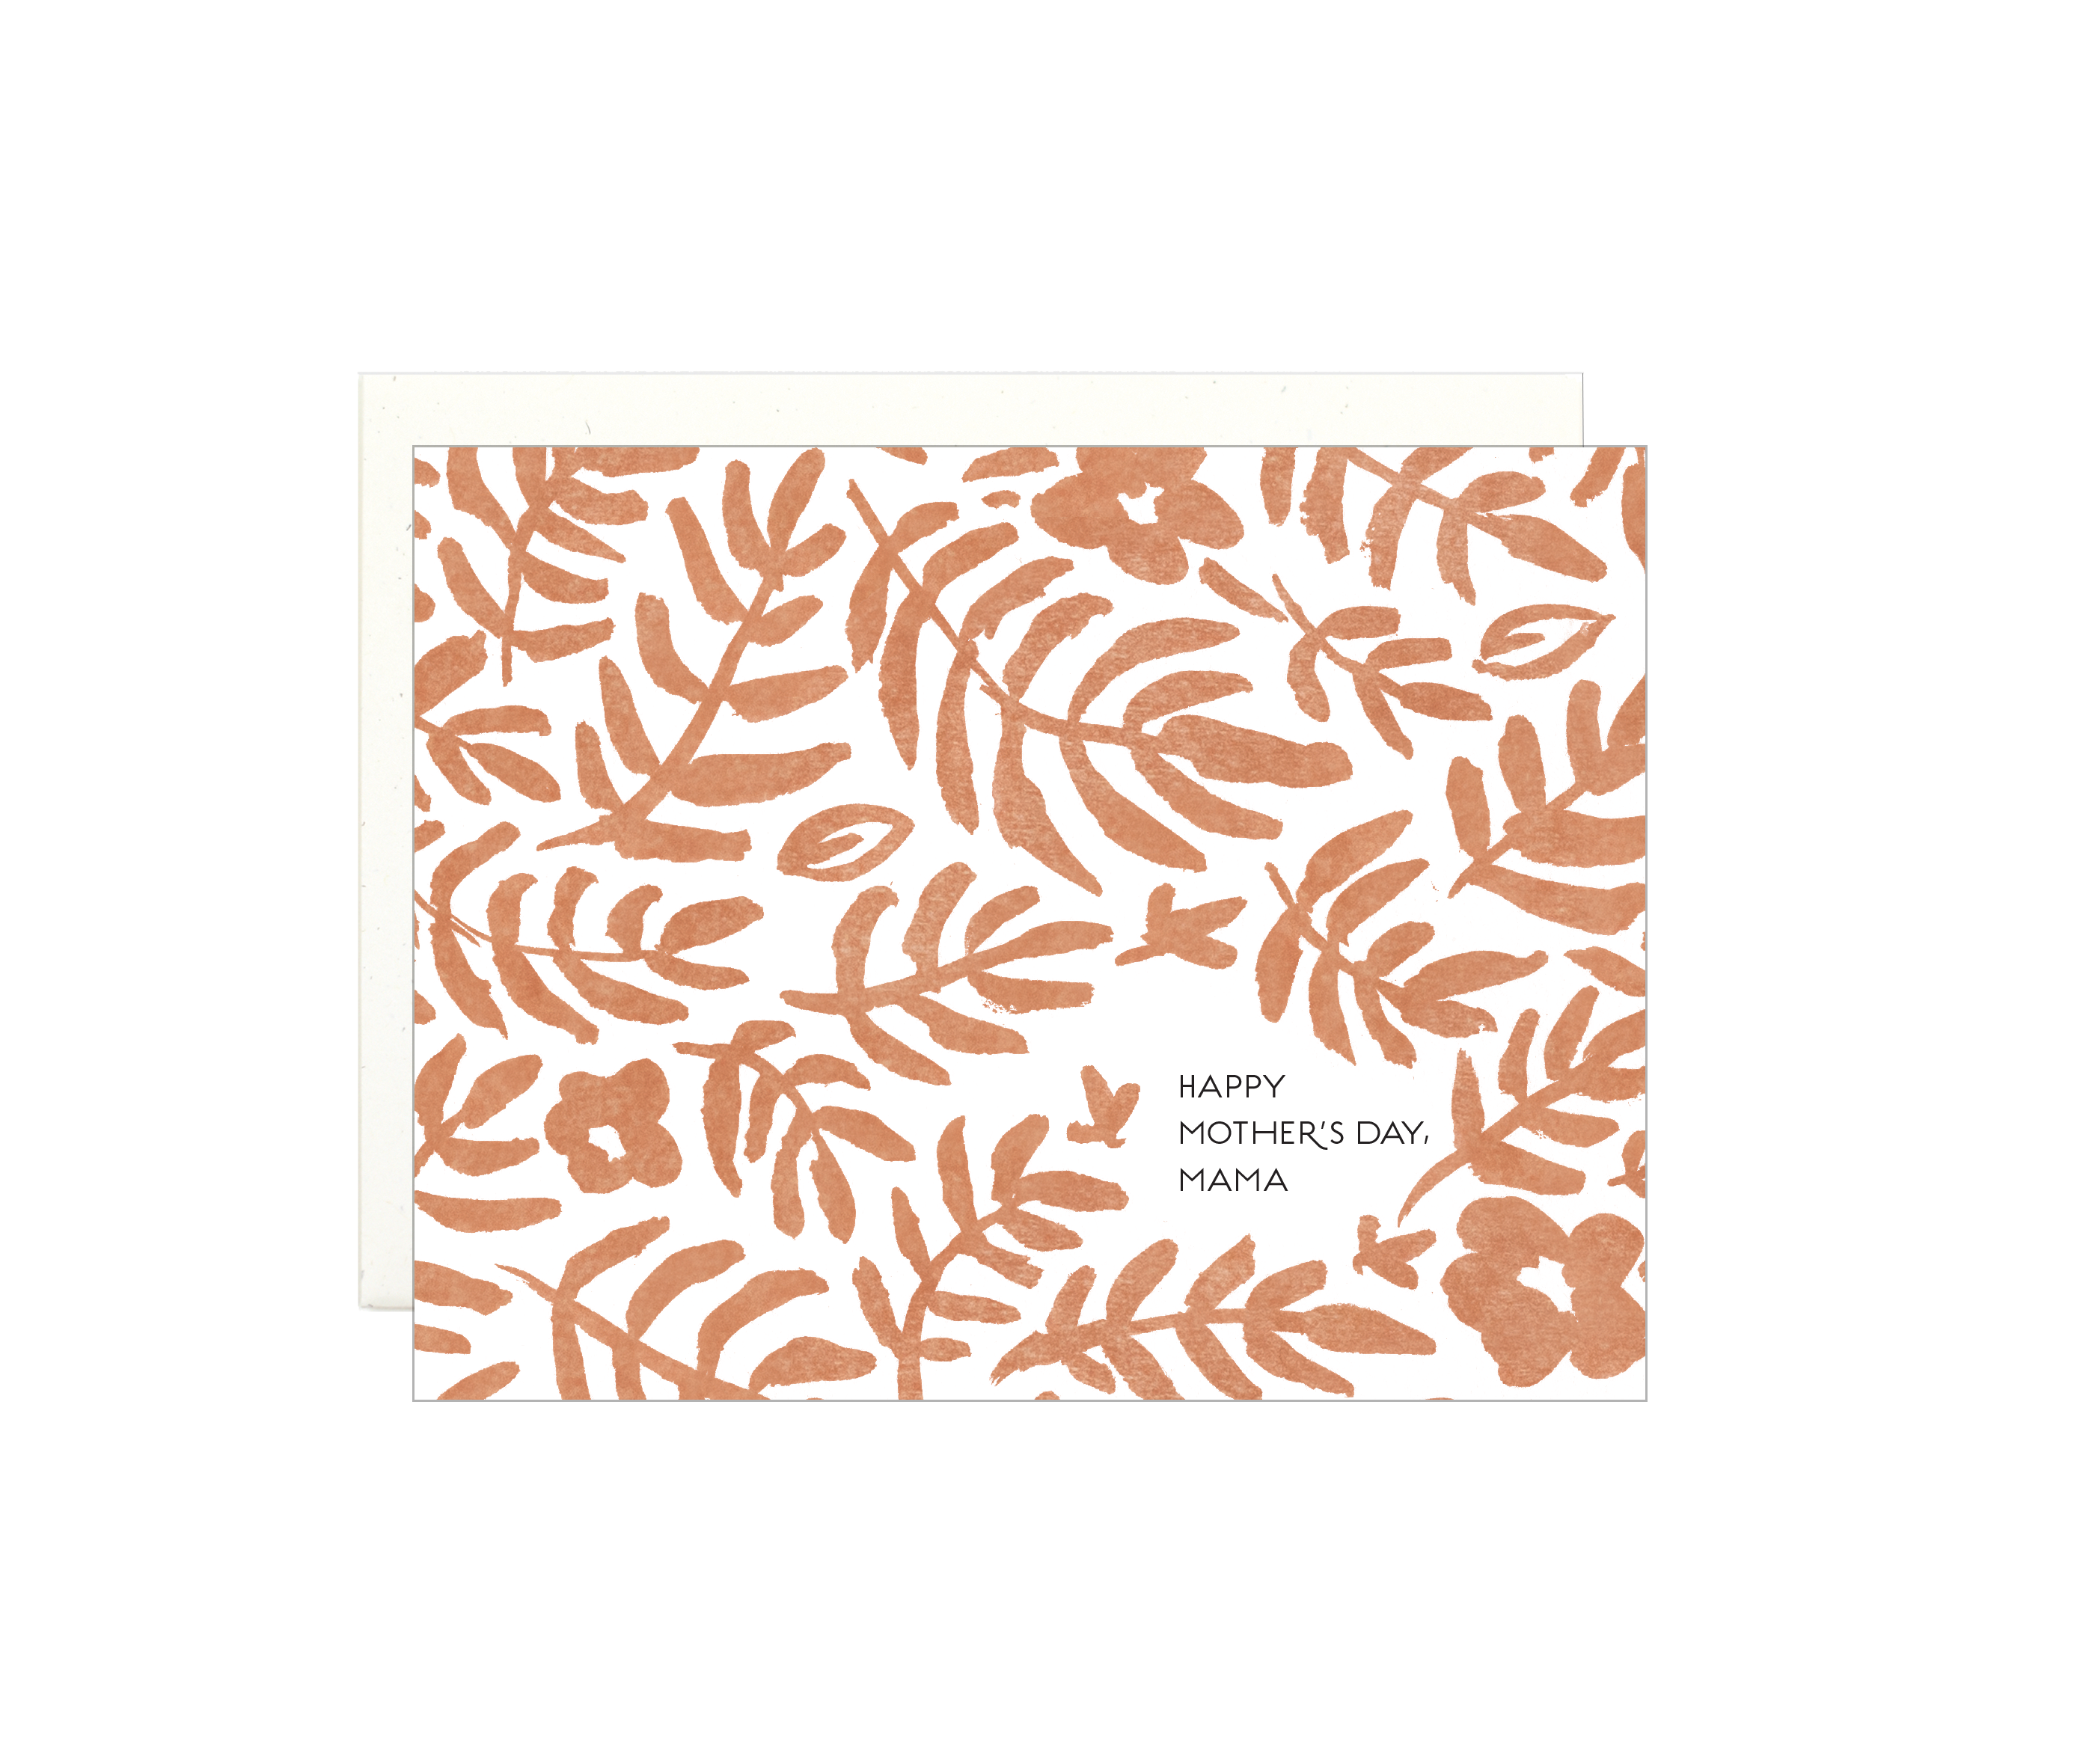 Happy Mother's Day Mama - Letterpress Card